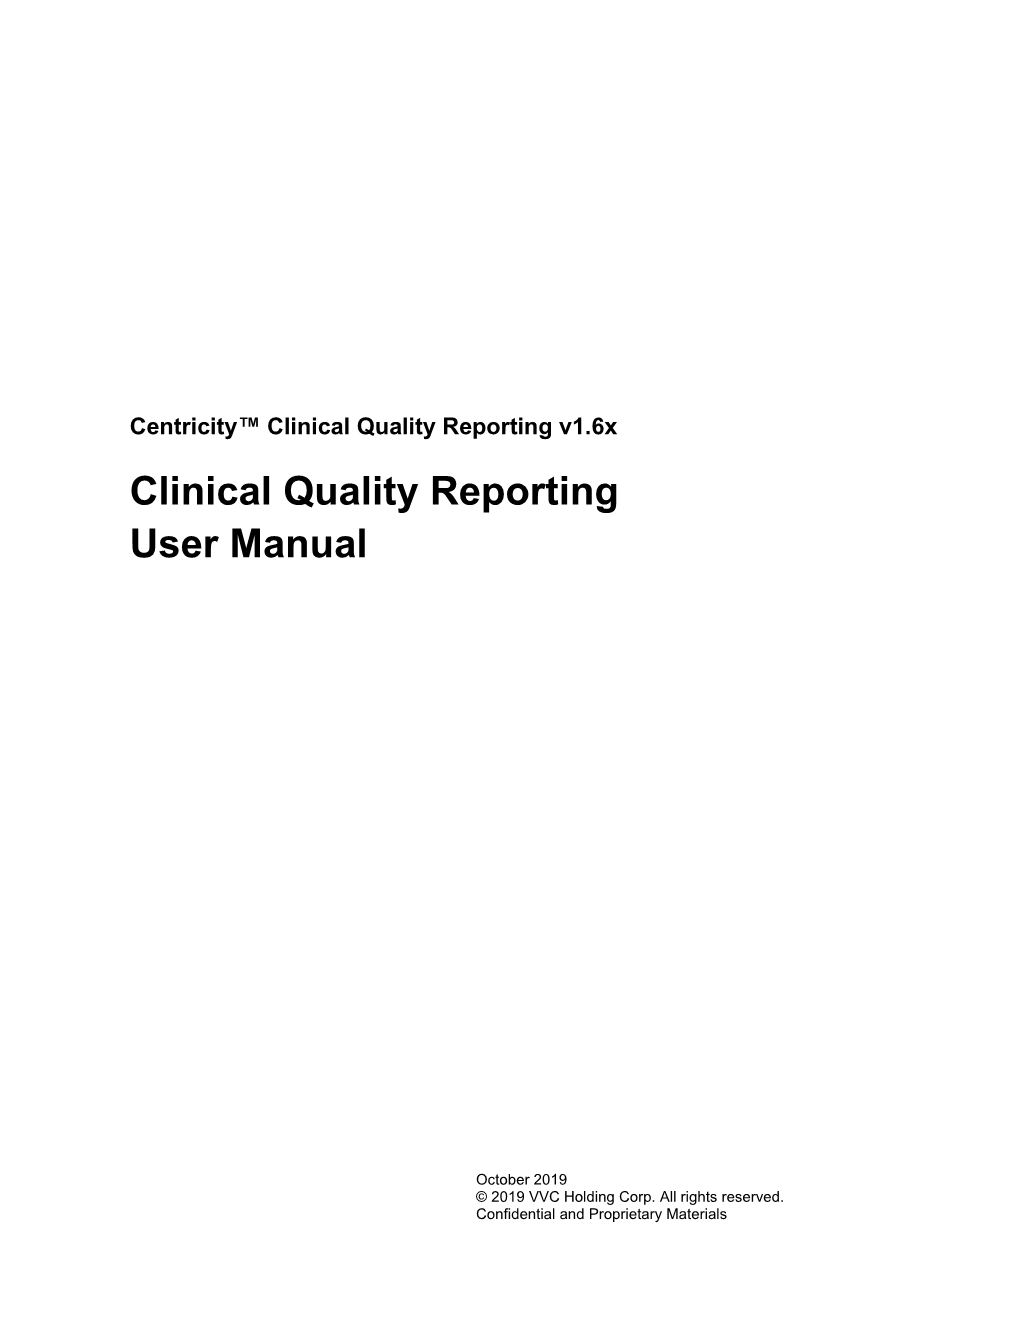 Clinical Quality Reporting User Manual